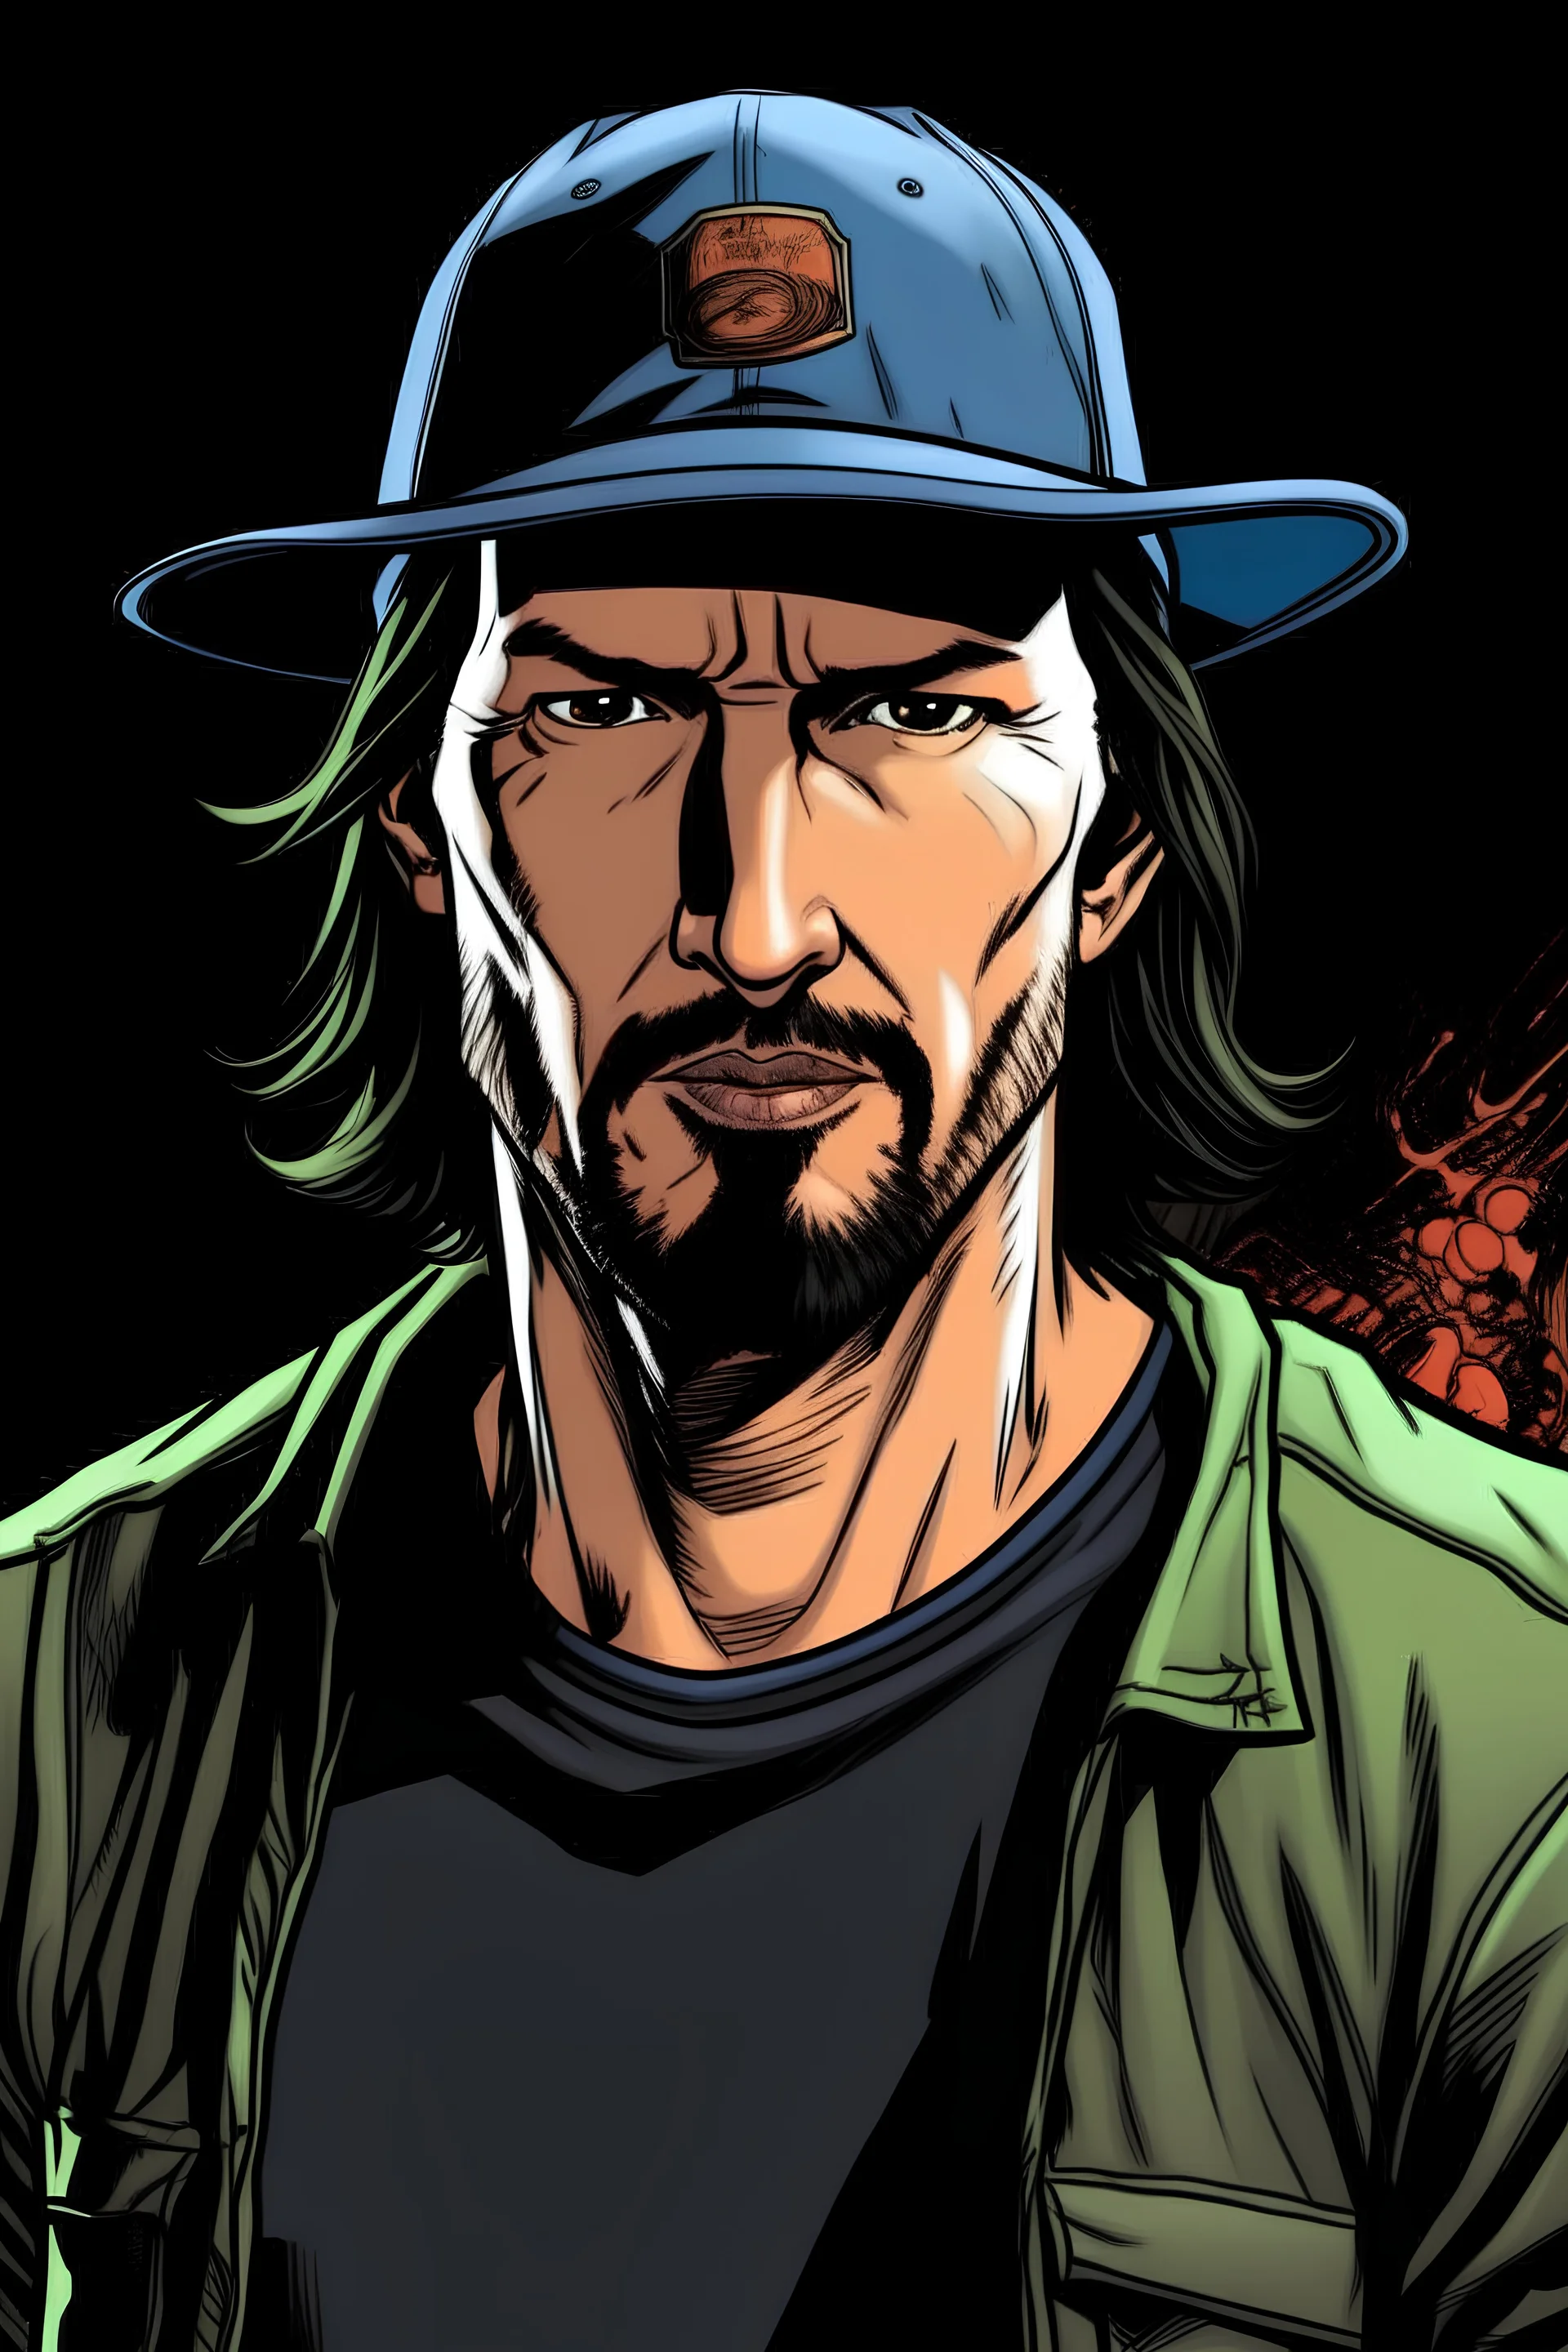 Keanu reeves lookalike with baseball hat and his stomach coming out from the belly button comic book style tales from the crypt horror